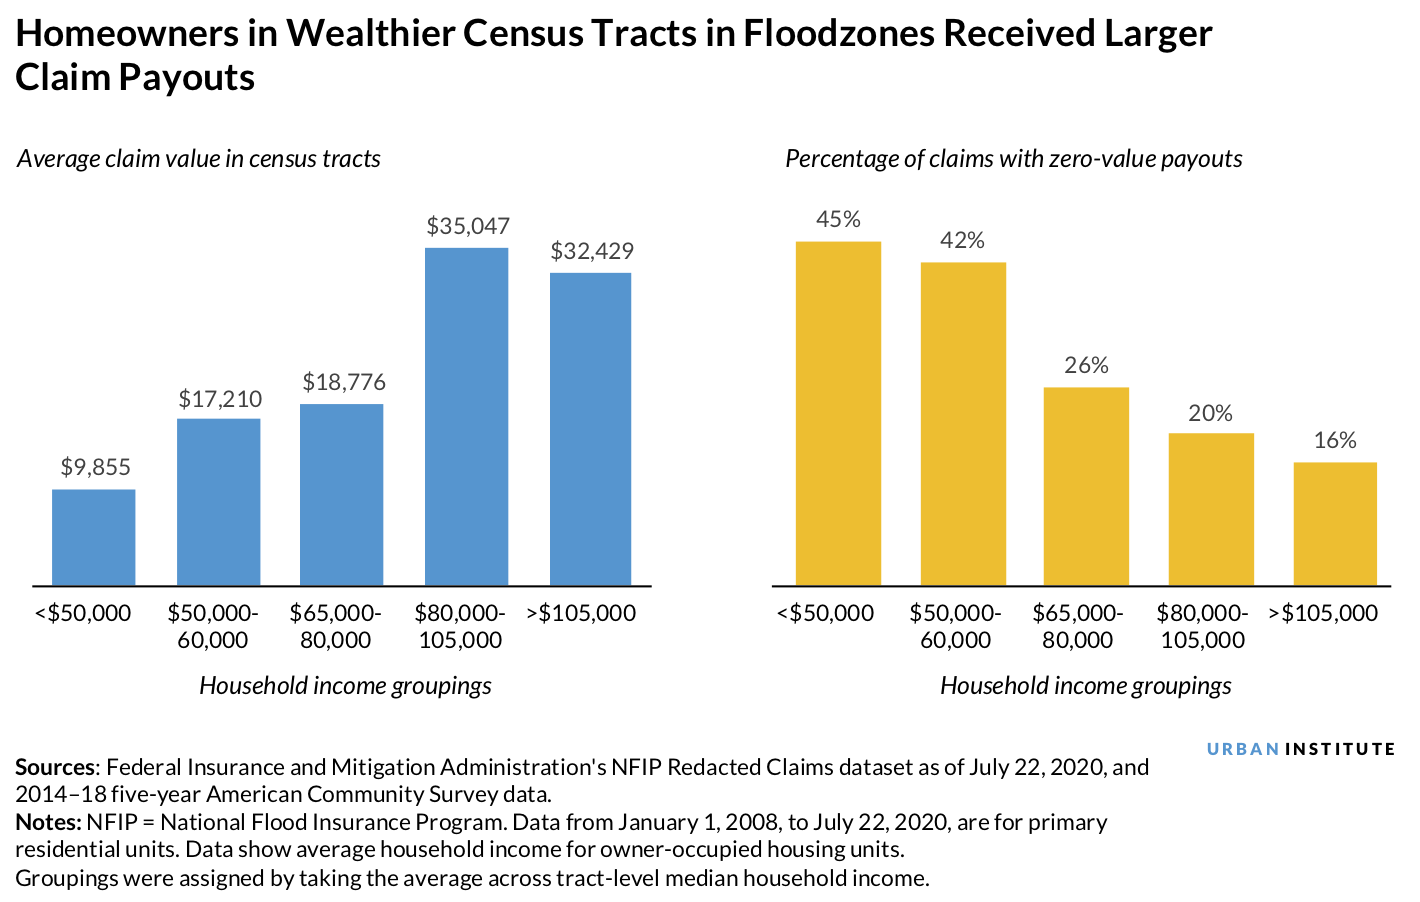 NFIP claims filed by households in census tracts in Greater New Orleans, by income